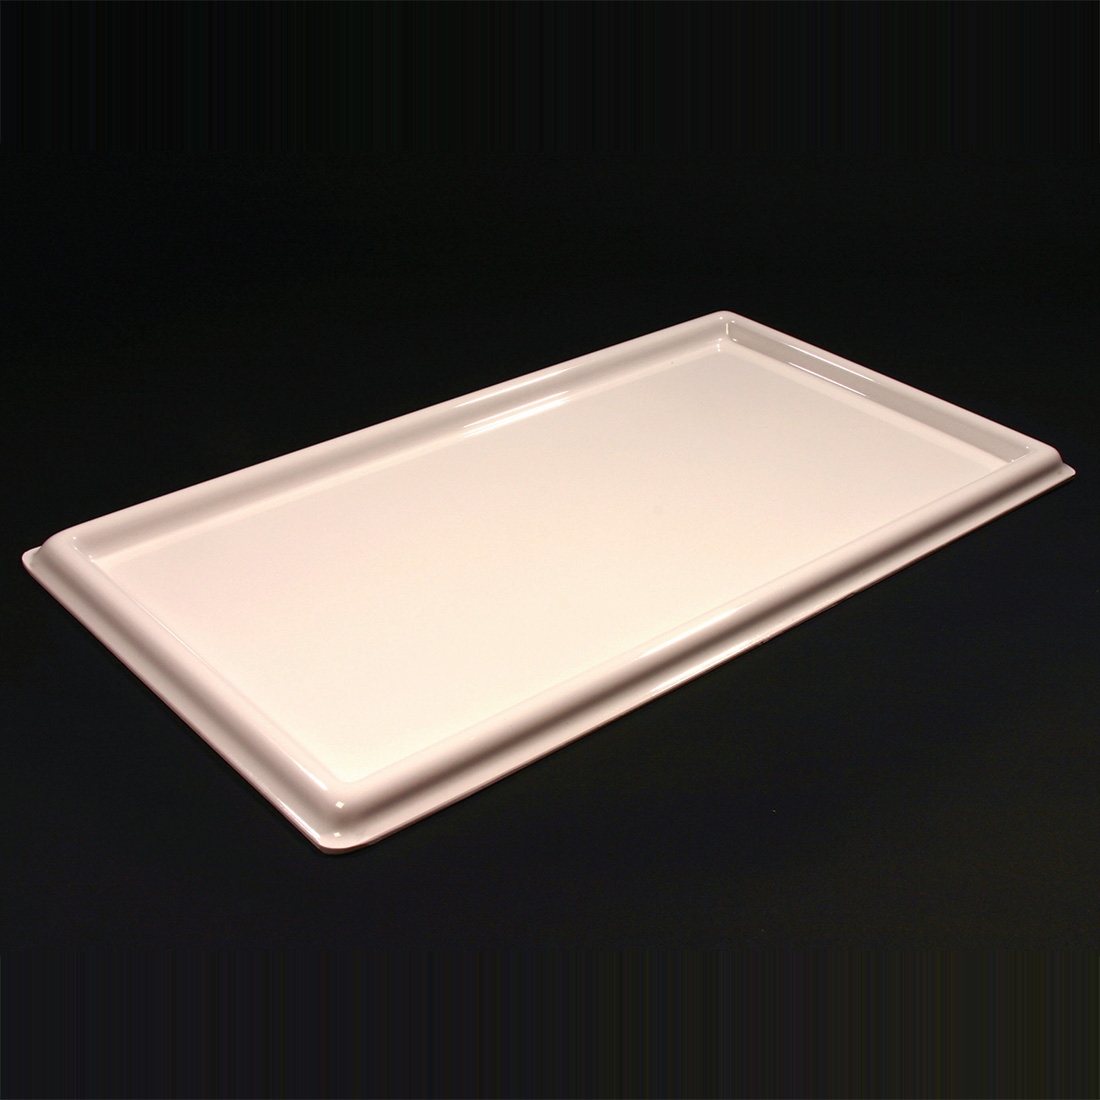 Laboratory Trays and Liners